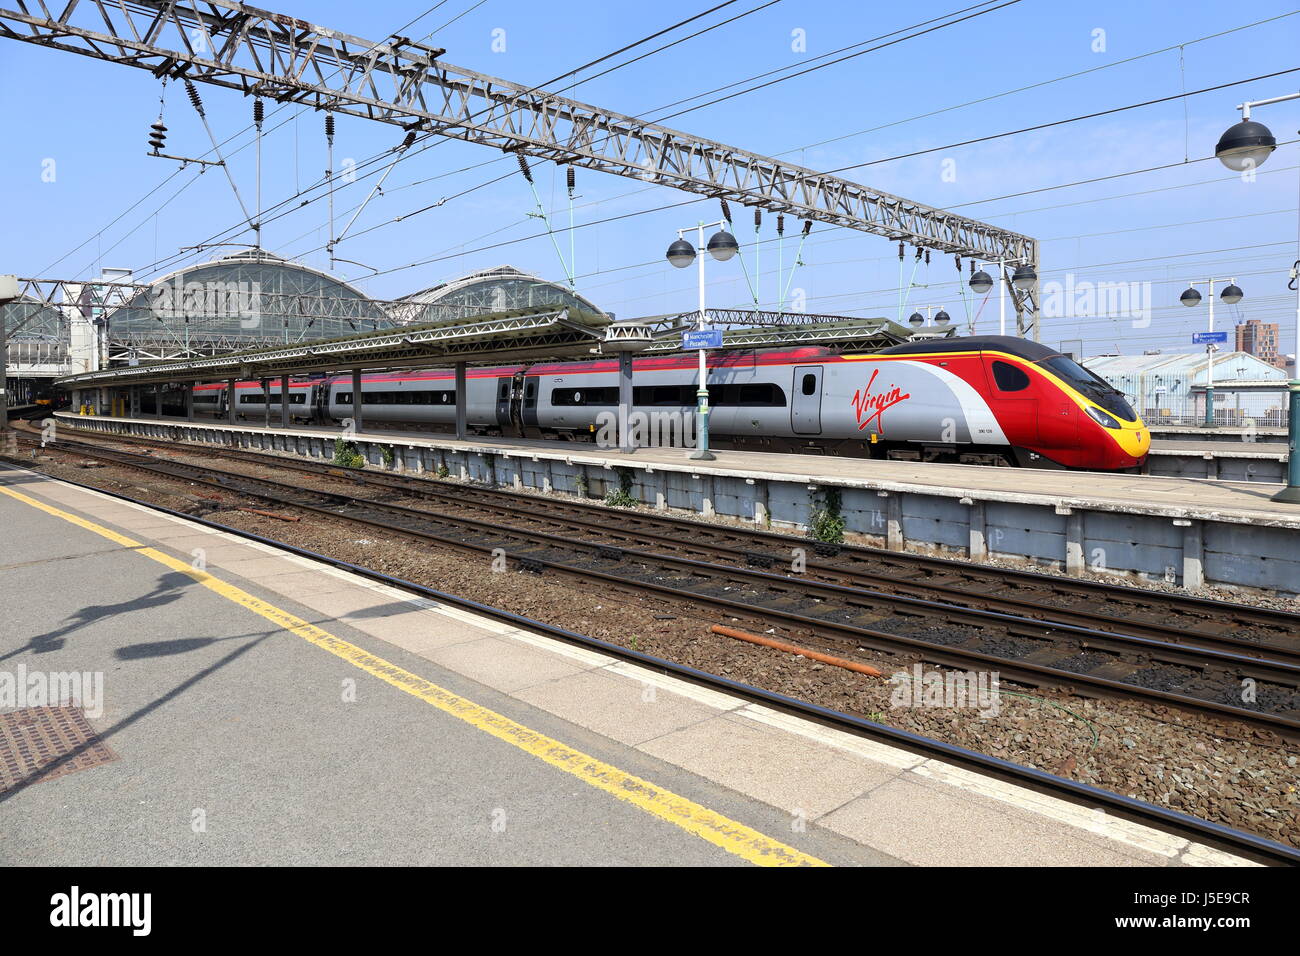 Virgin Rail Intercity Train at Piccadilly station, Manchester. Stock Photo